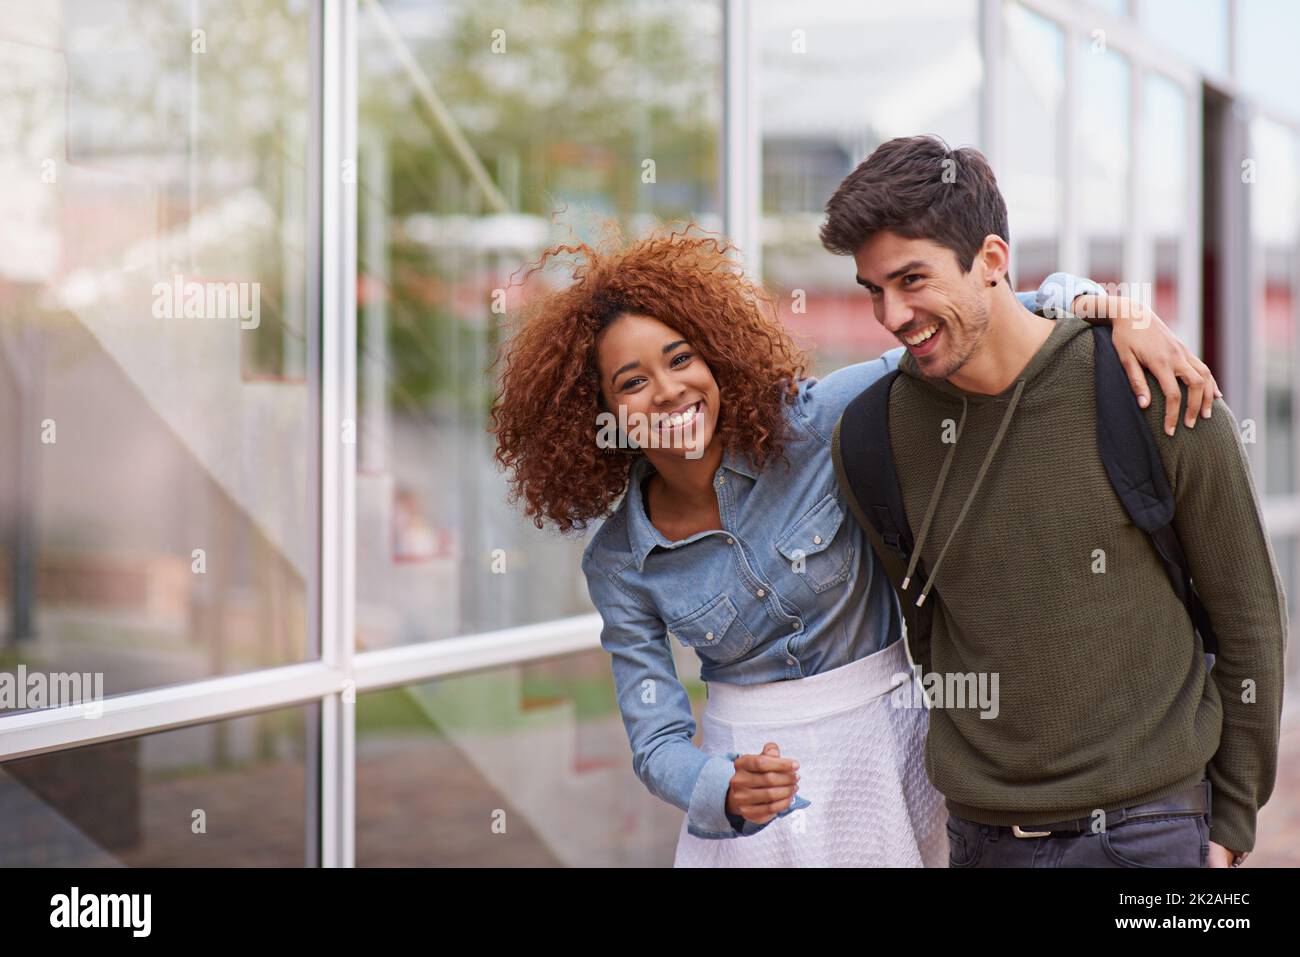 Learning about their love. a young couple on campus. Stock Photo